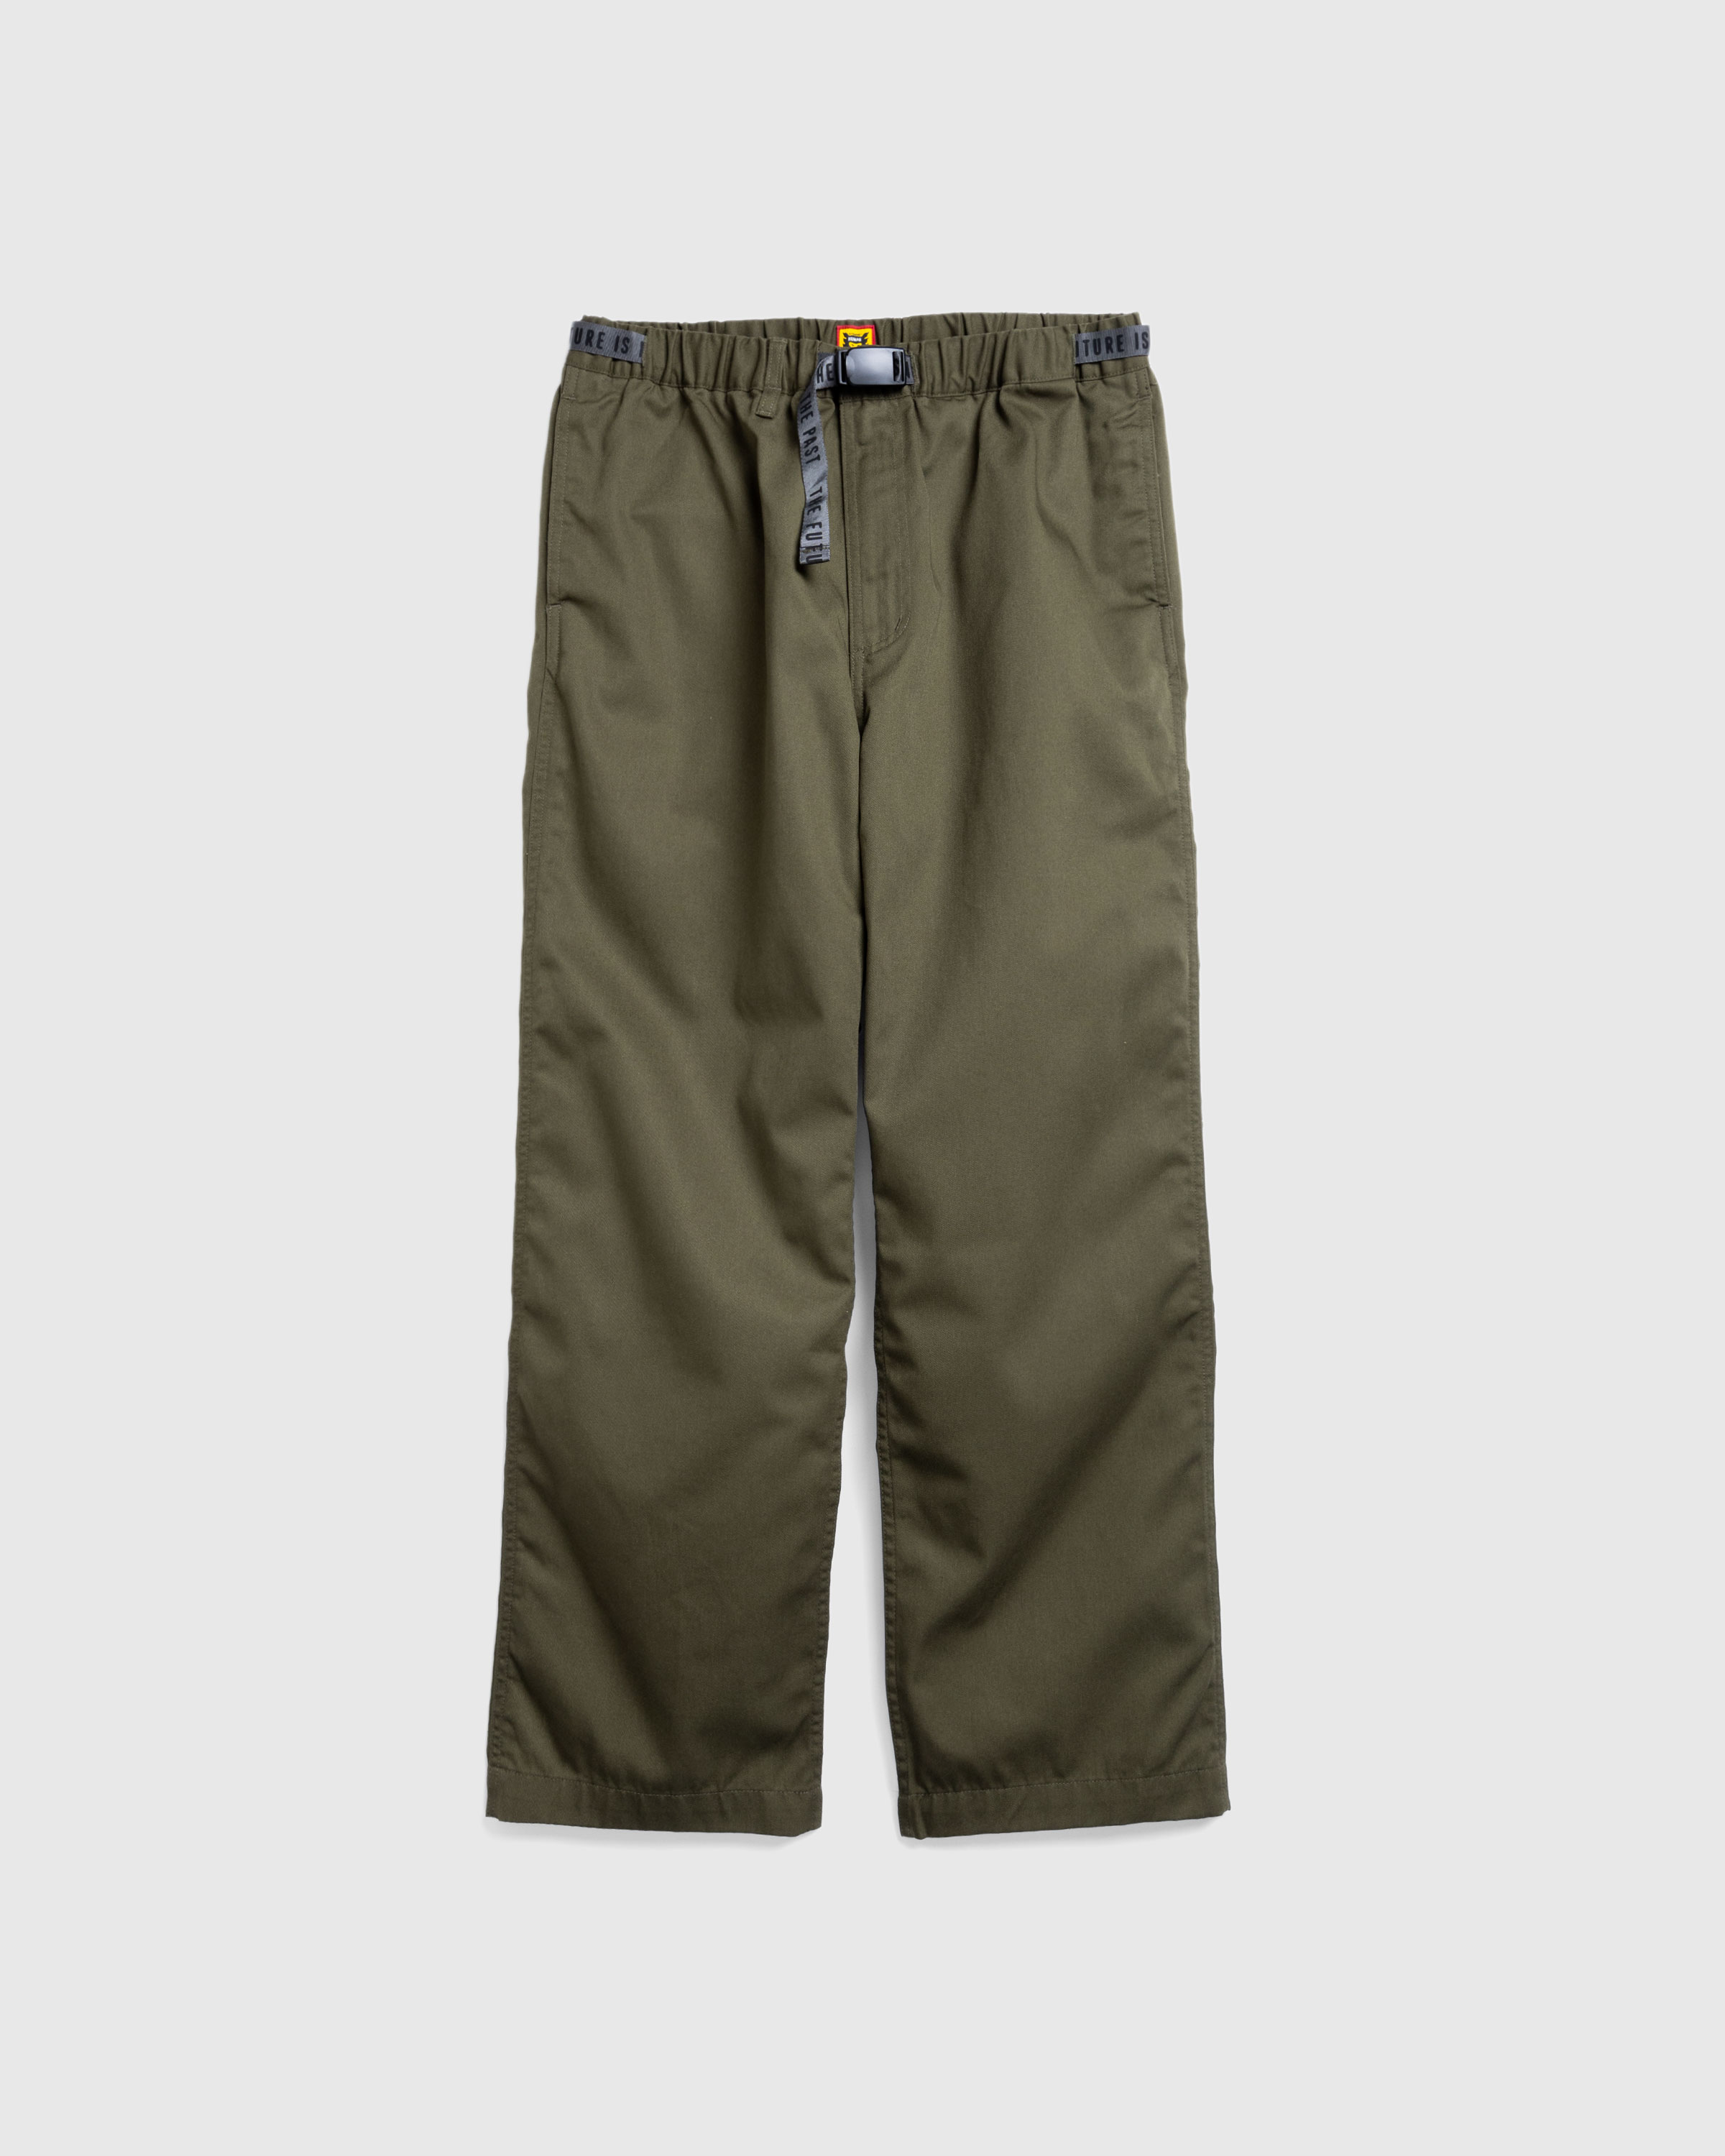 Human Made – Easy Pants Olive Drab - Trousers - Green - Image 1